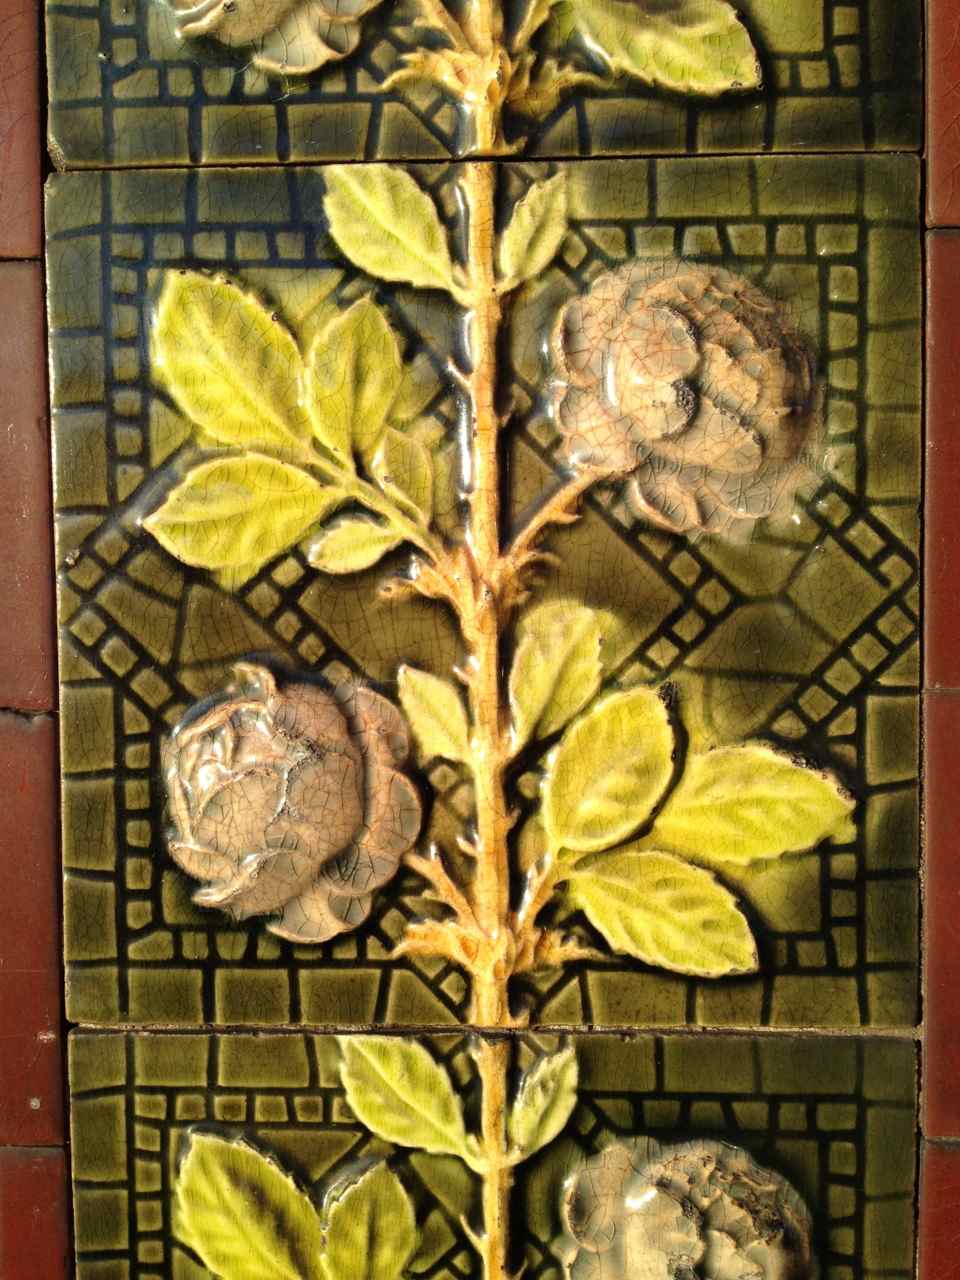 Antique rose tile with chartreuse leaves in Richmond, London